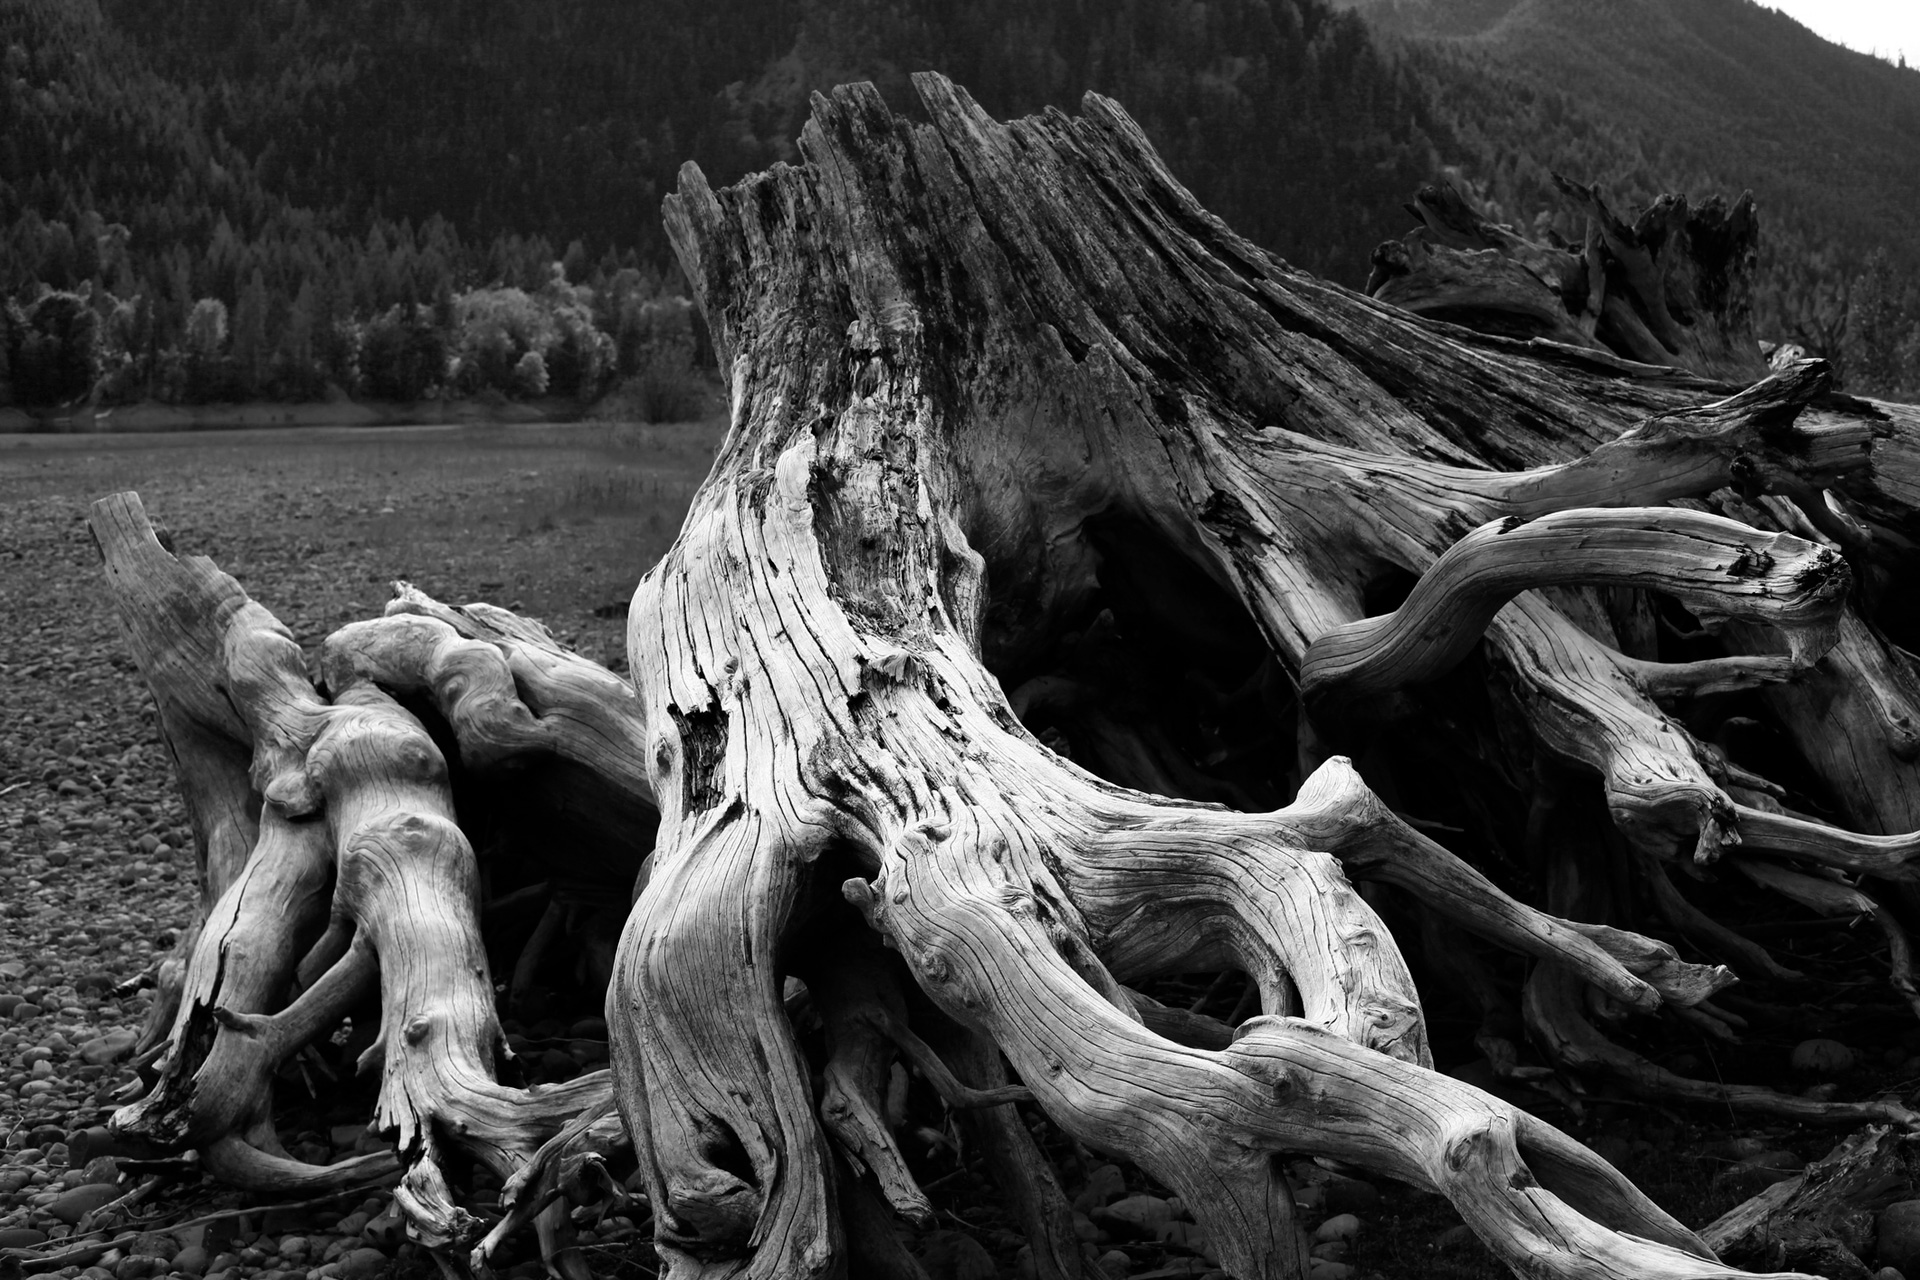 black and white image of a tree stump